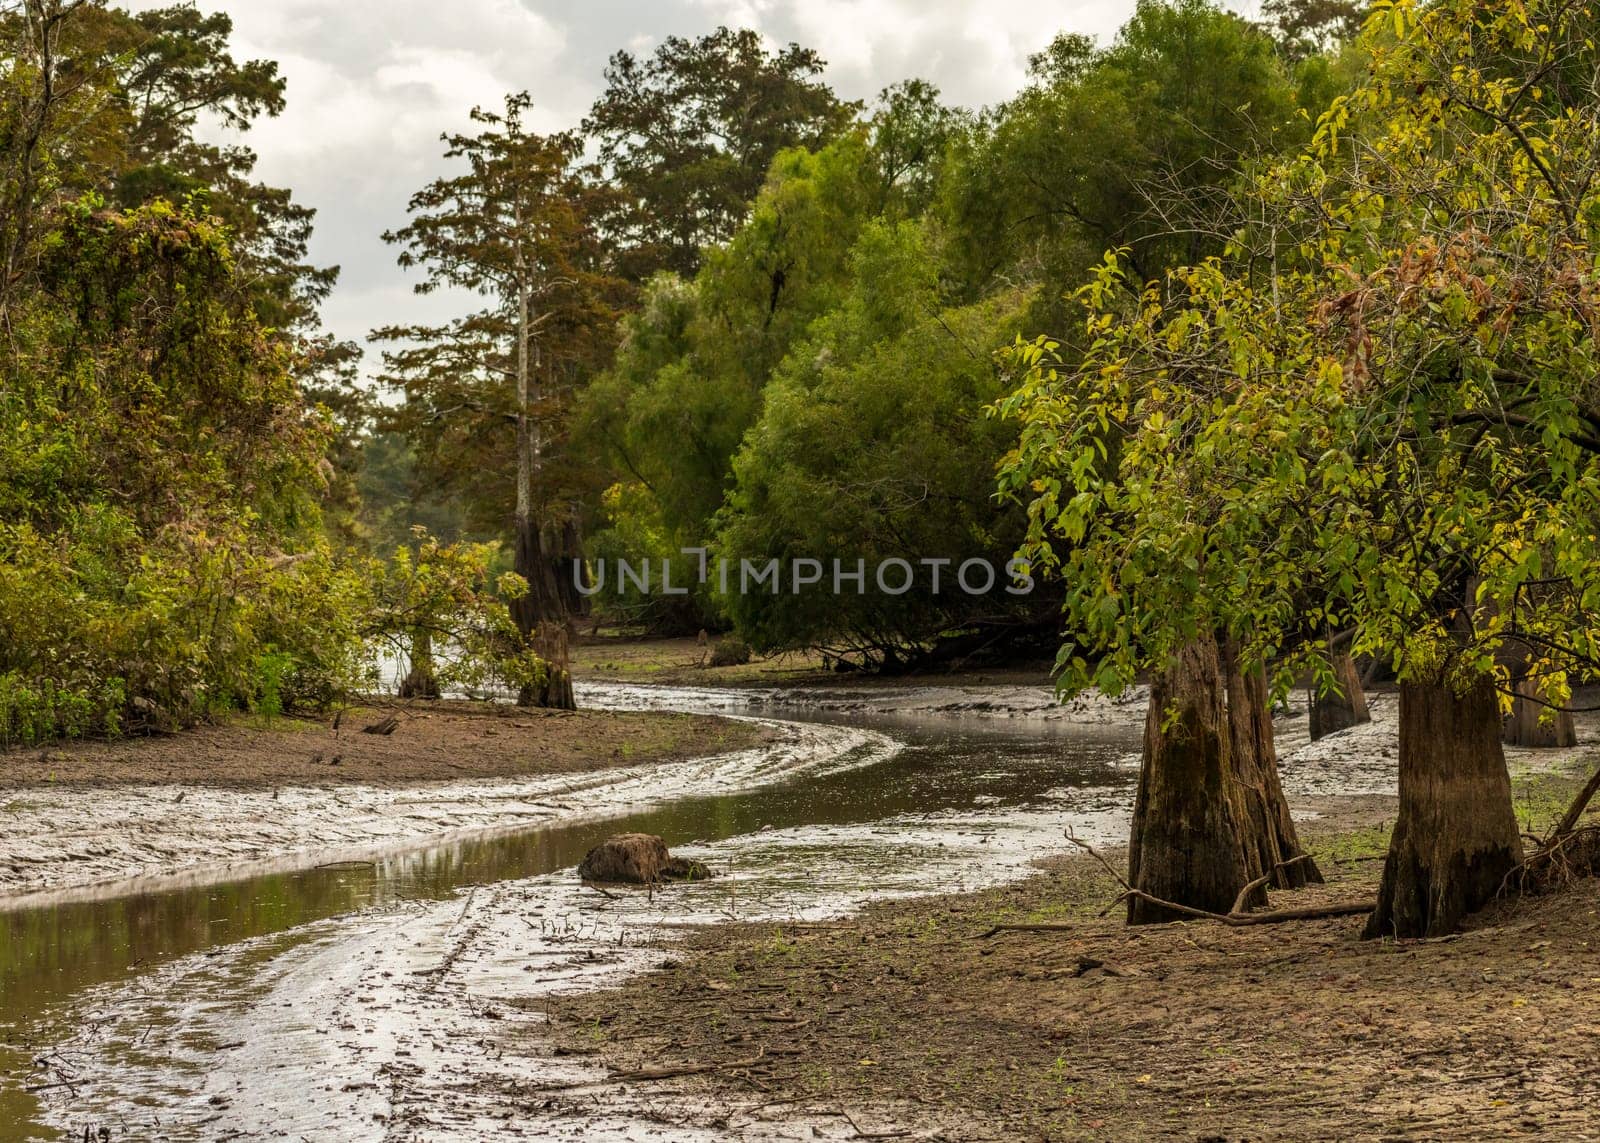 Muddy track channel taken by airboats in Atchafalaya basin by steheap